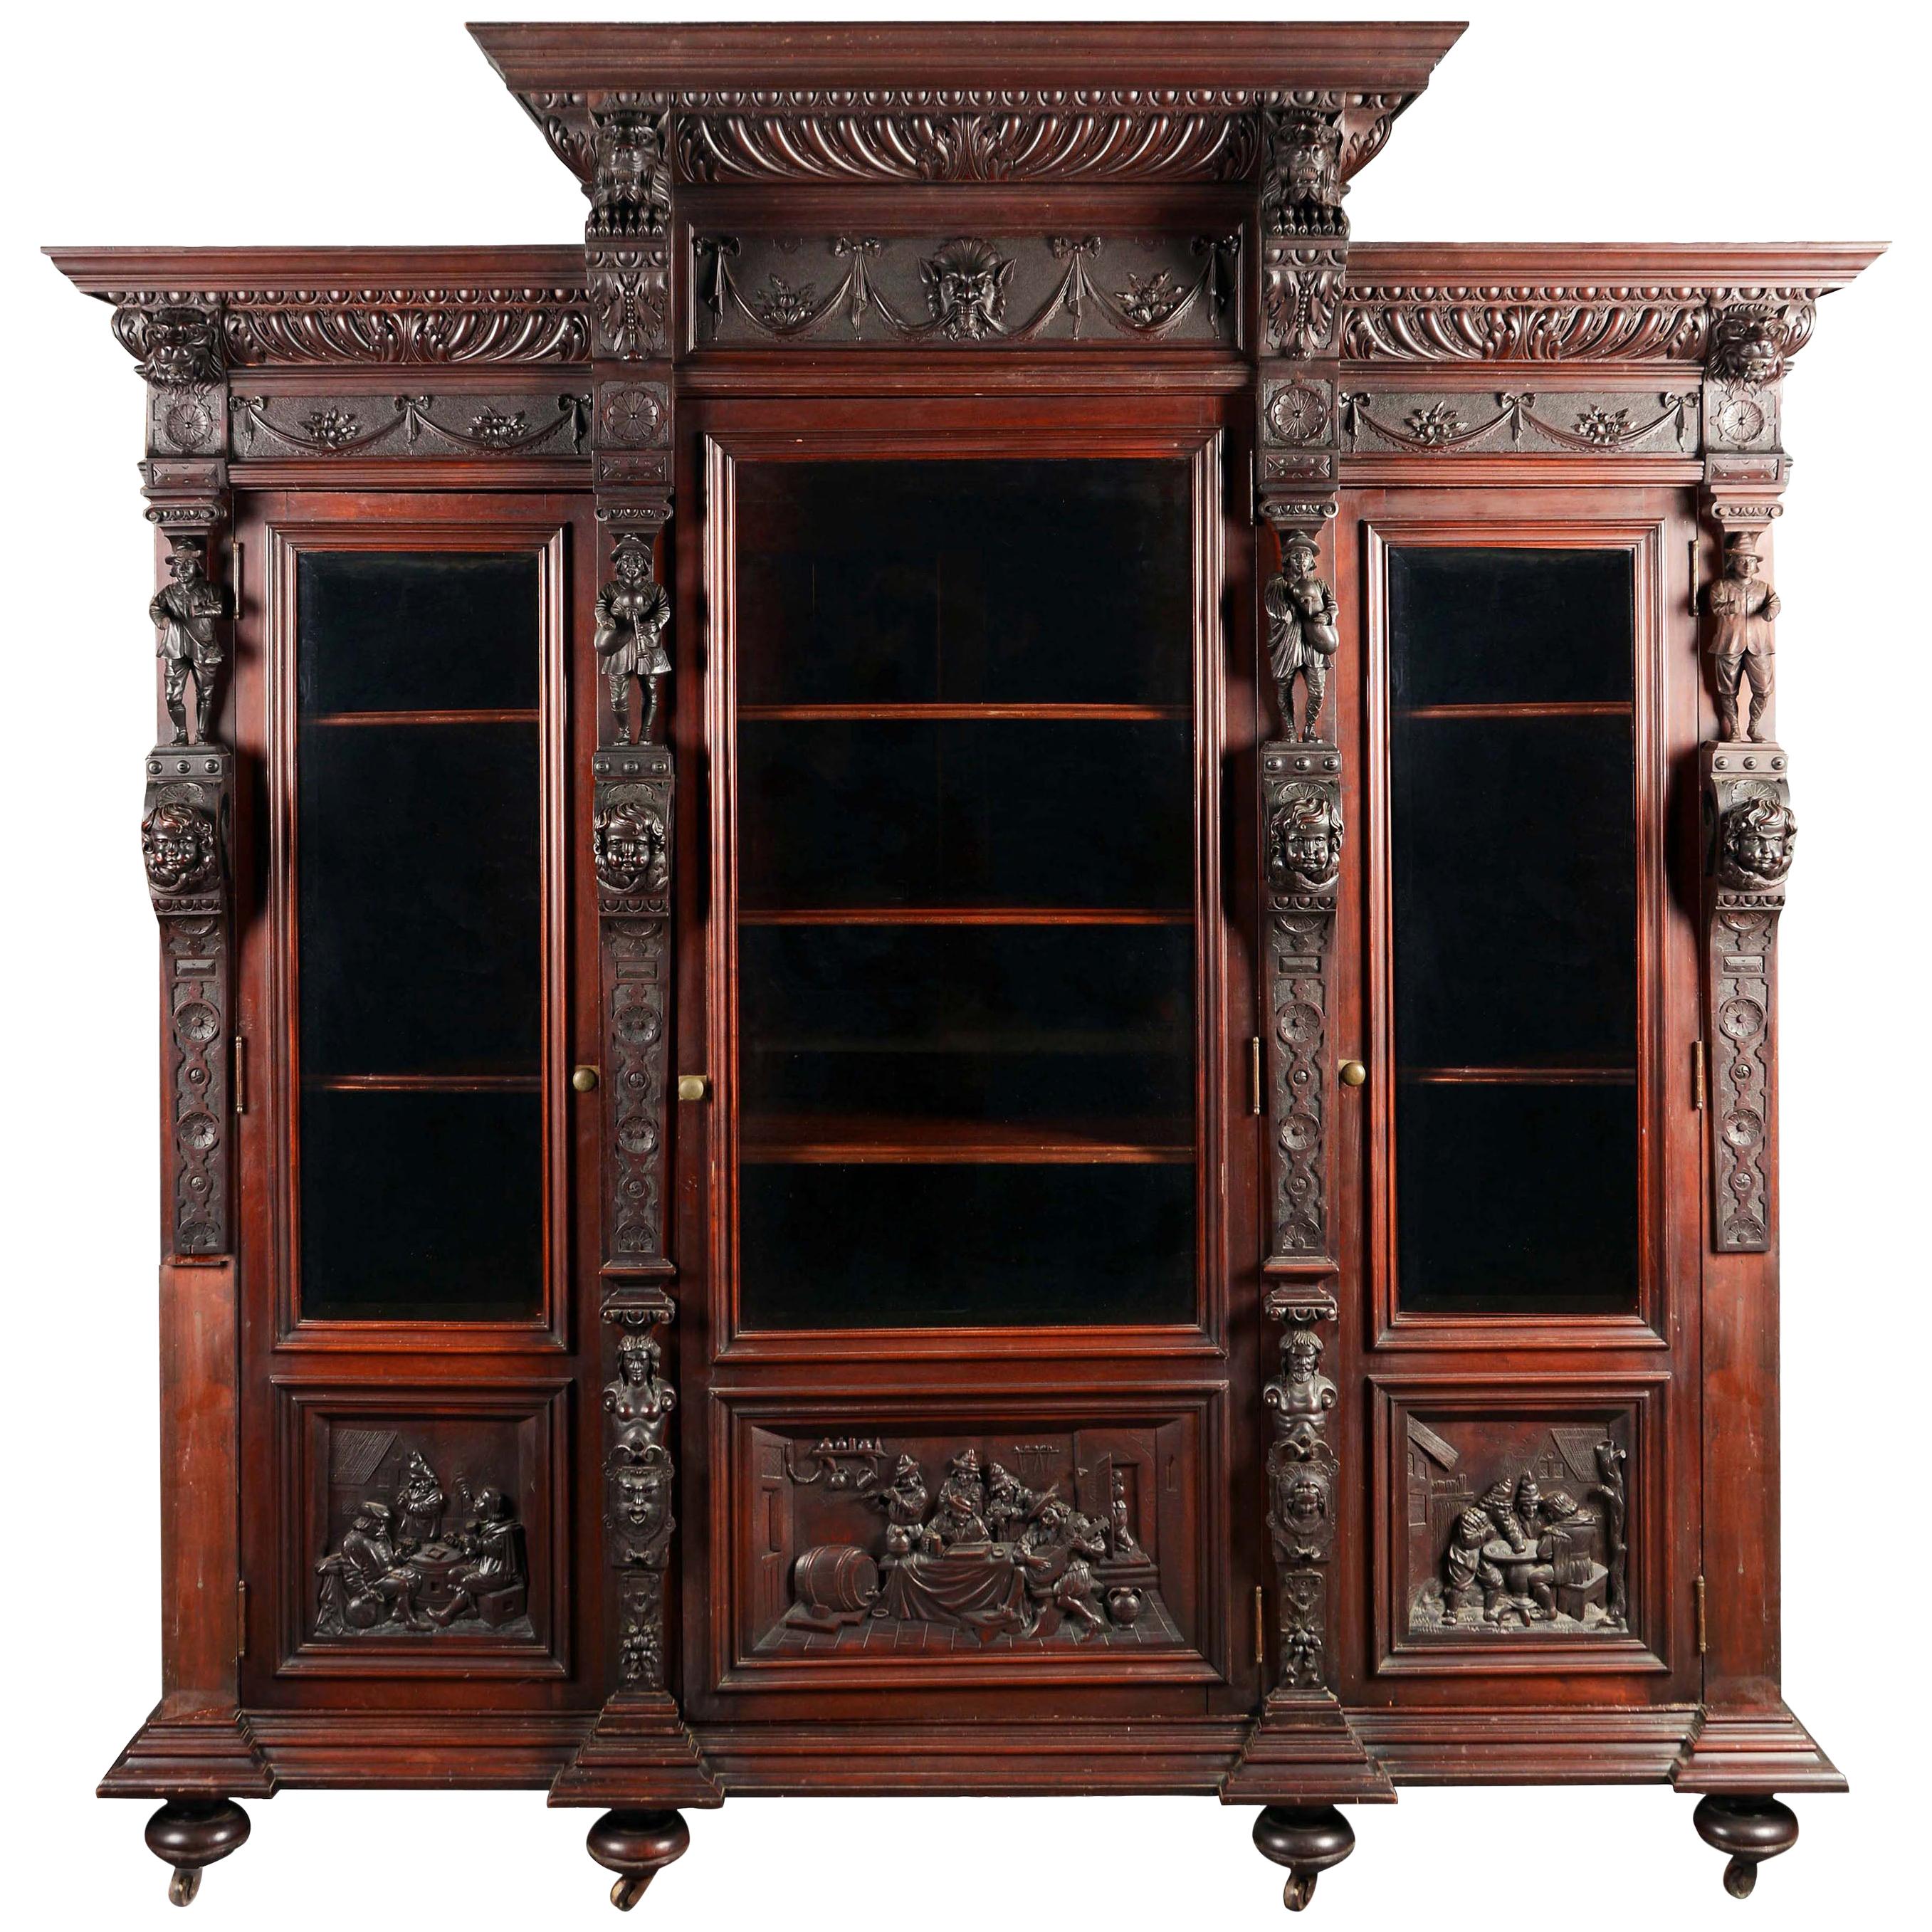 19th Century Red Mahogany Renaissance Bookcase with Caryatids and Carved Panels